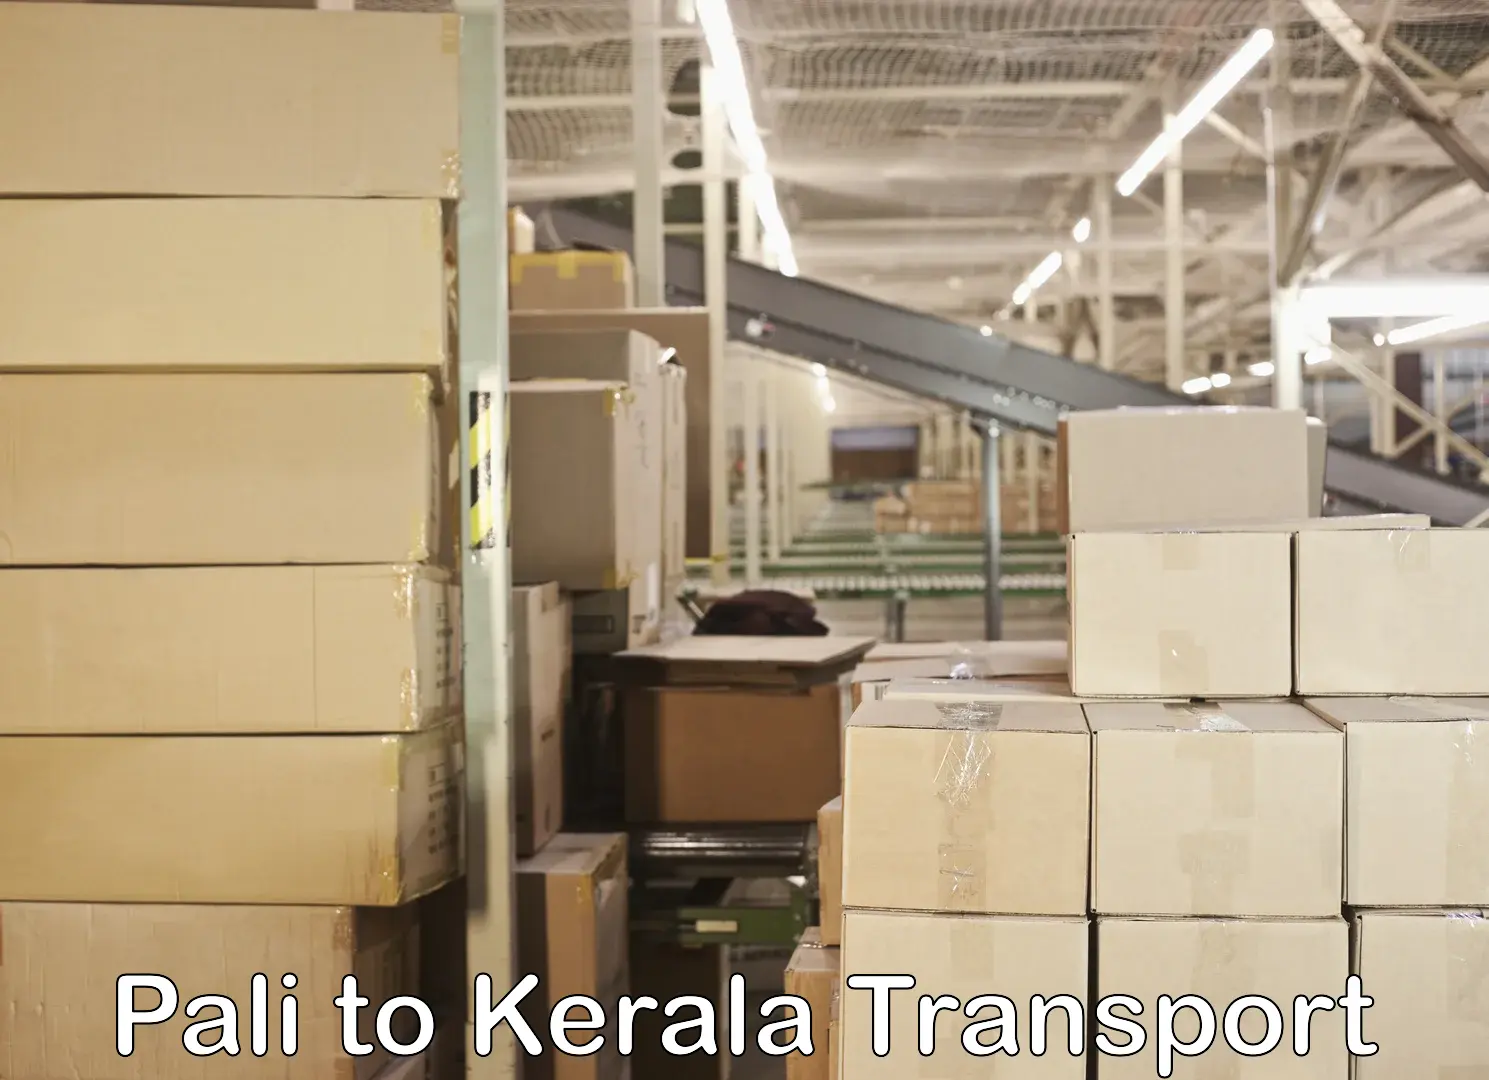 Container transport service Pali to Kerala